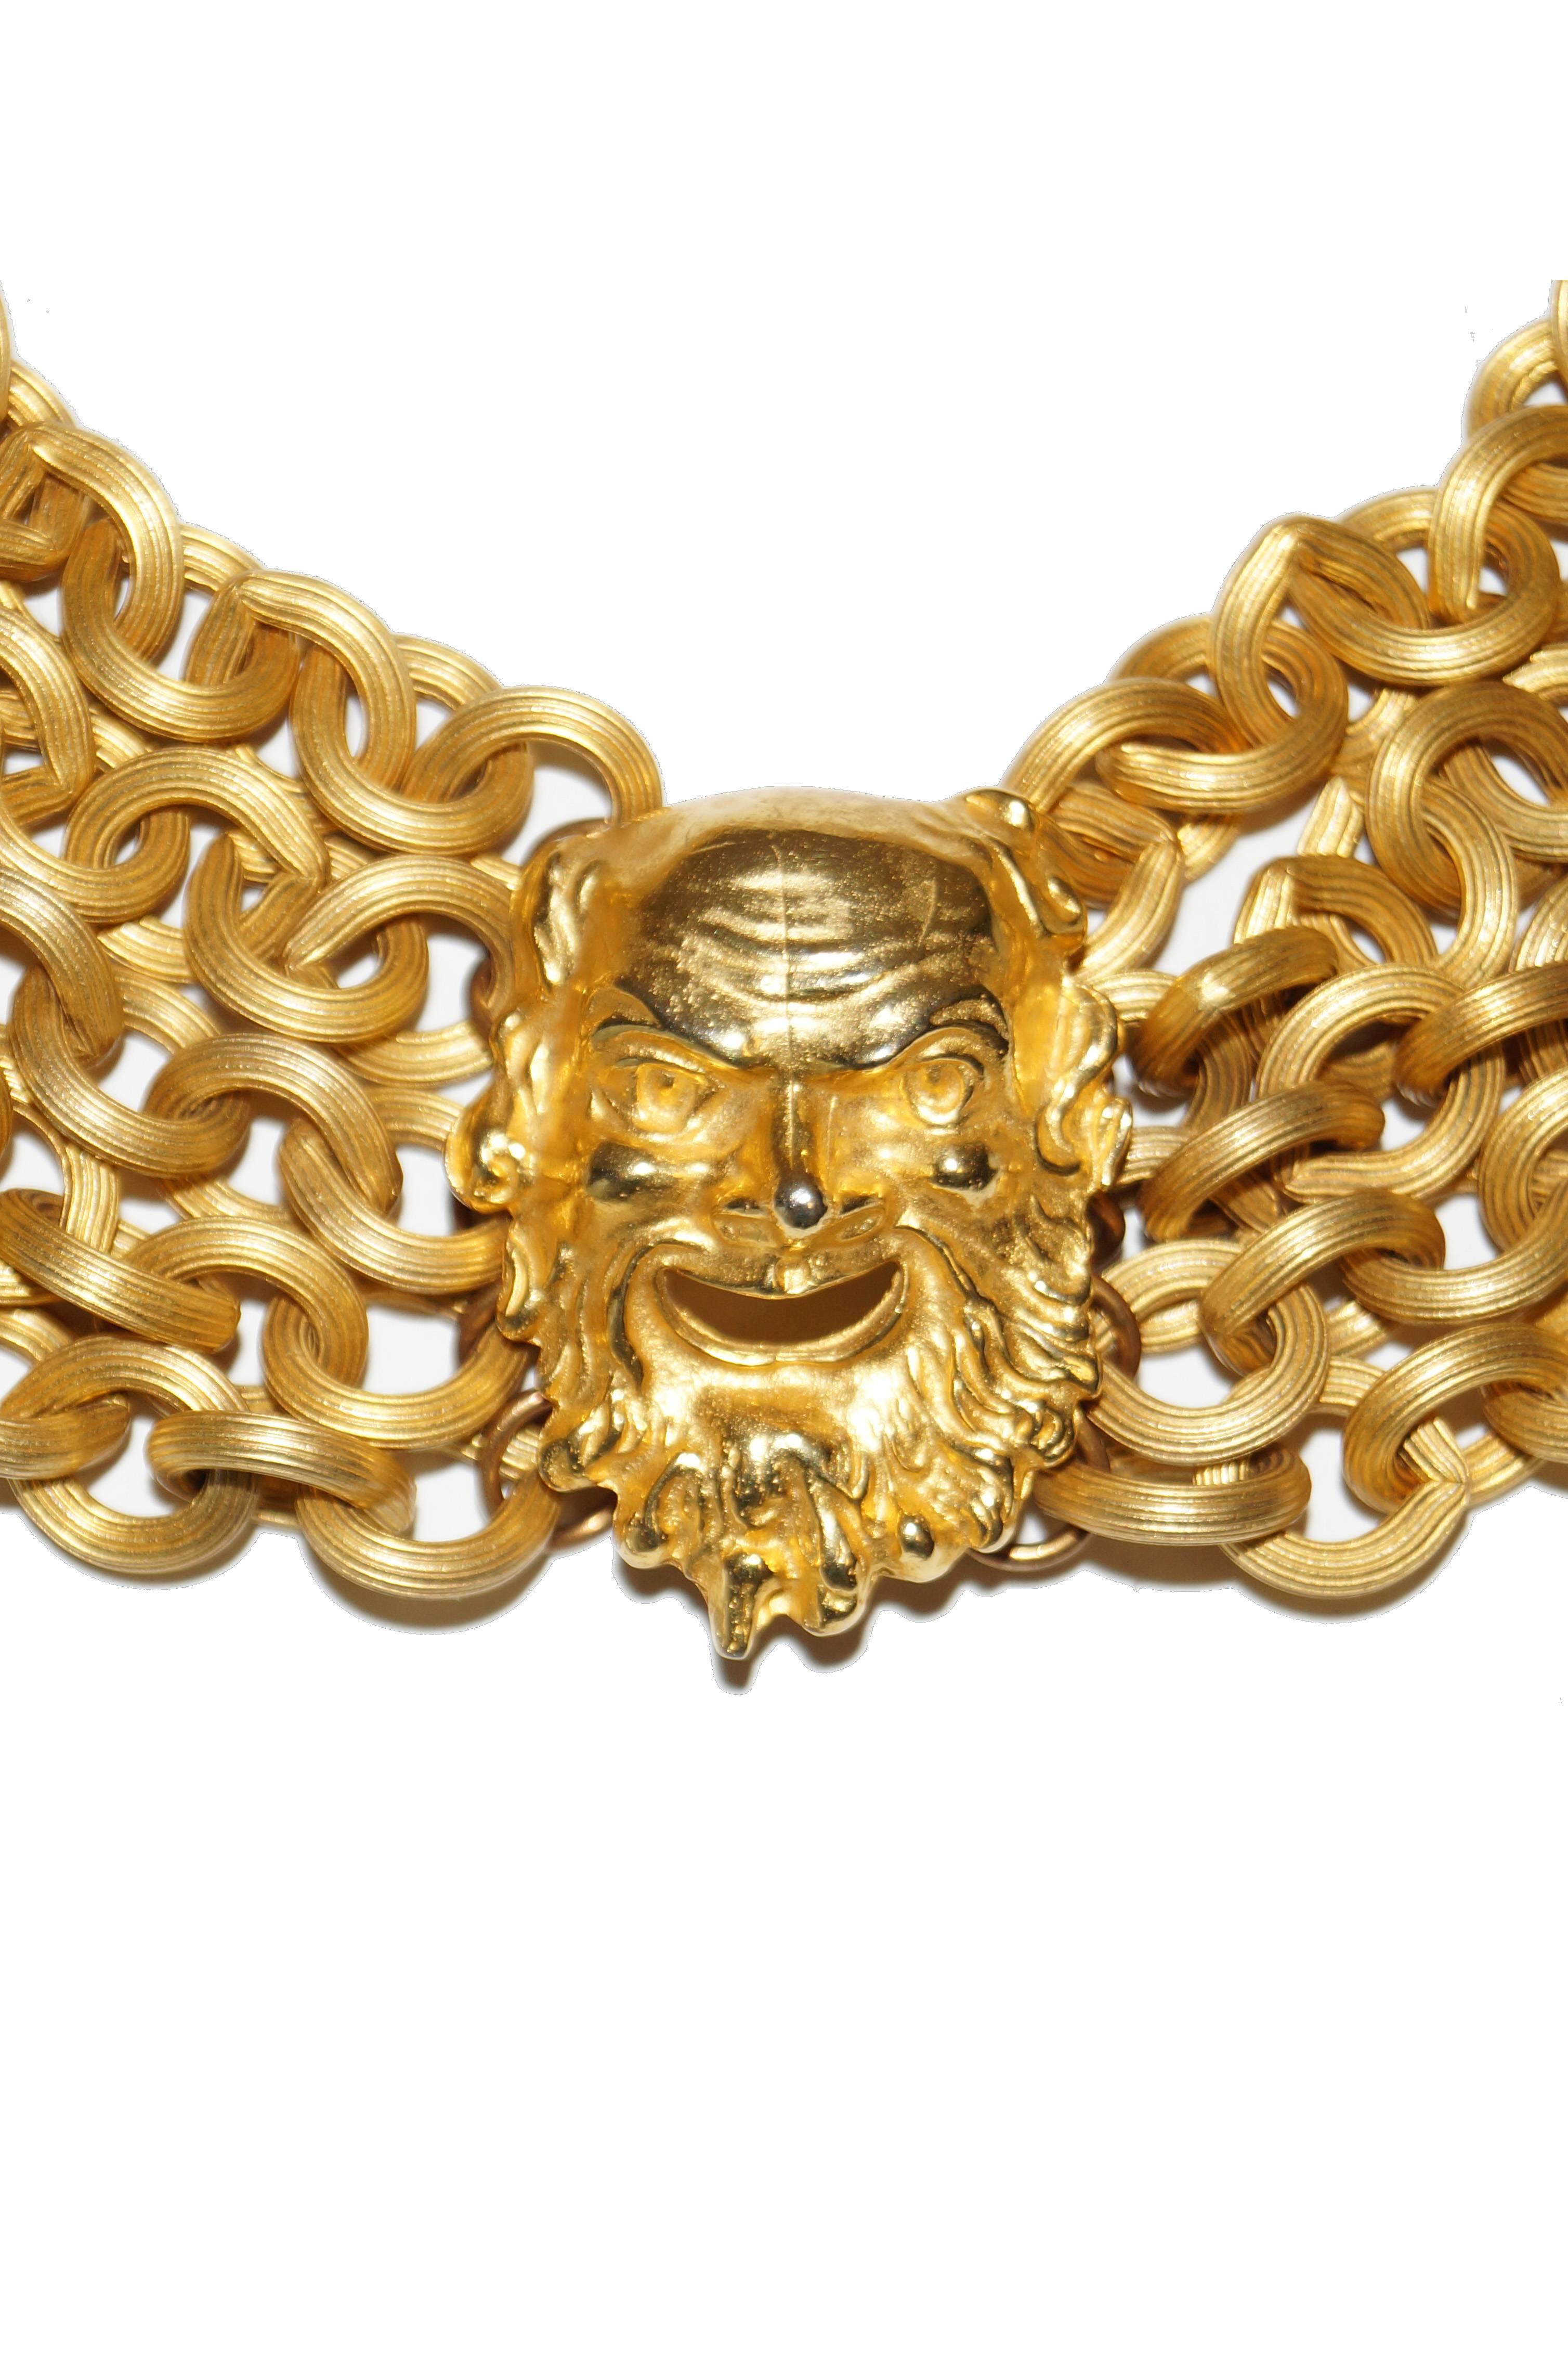 Heavy and well made choker by Catherine Prevost of London, composed of a gold - tone sculpted Zeus head suspended between five heavy etched circle - chains. Striking statement choker you simply can't ignore! Reminiscent in mythological theme and